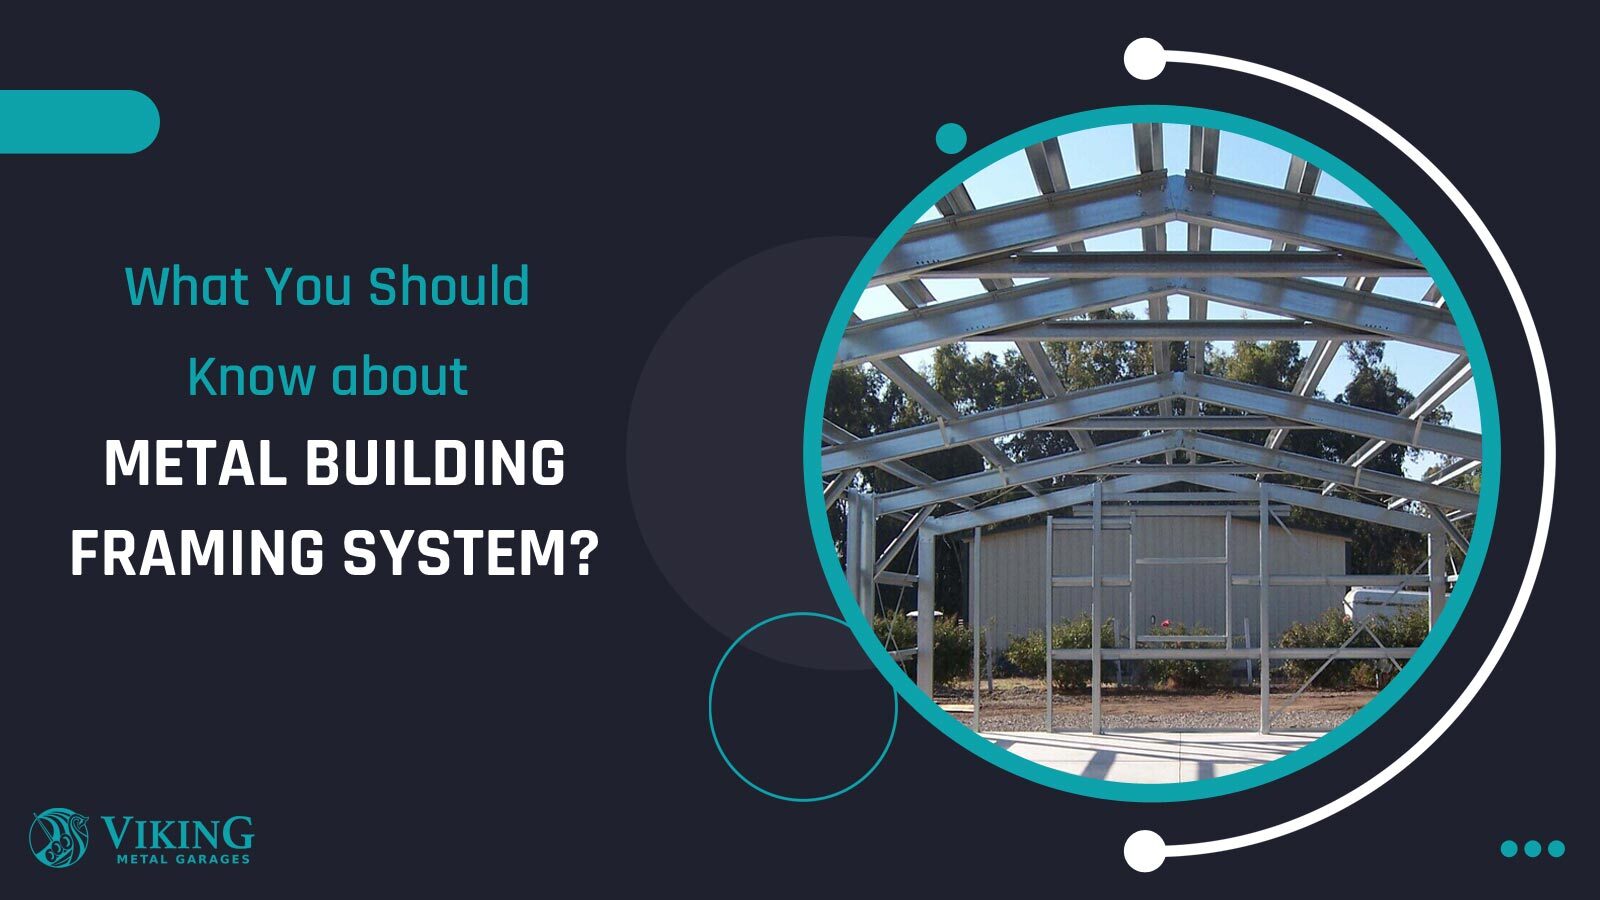 What You Should Know about Metal Building Framing System?